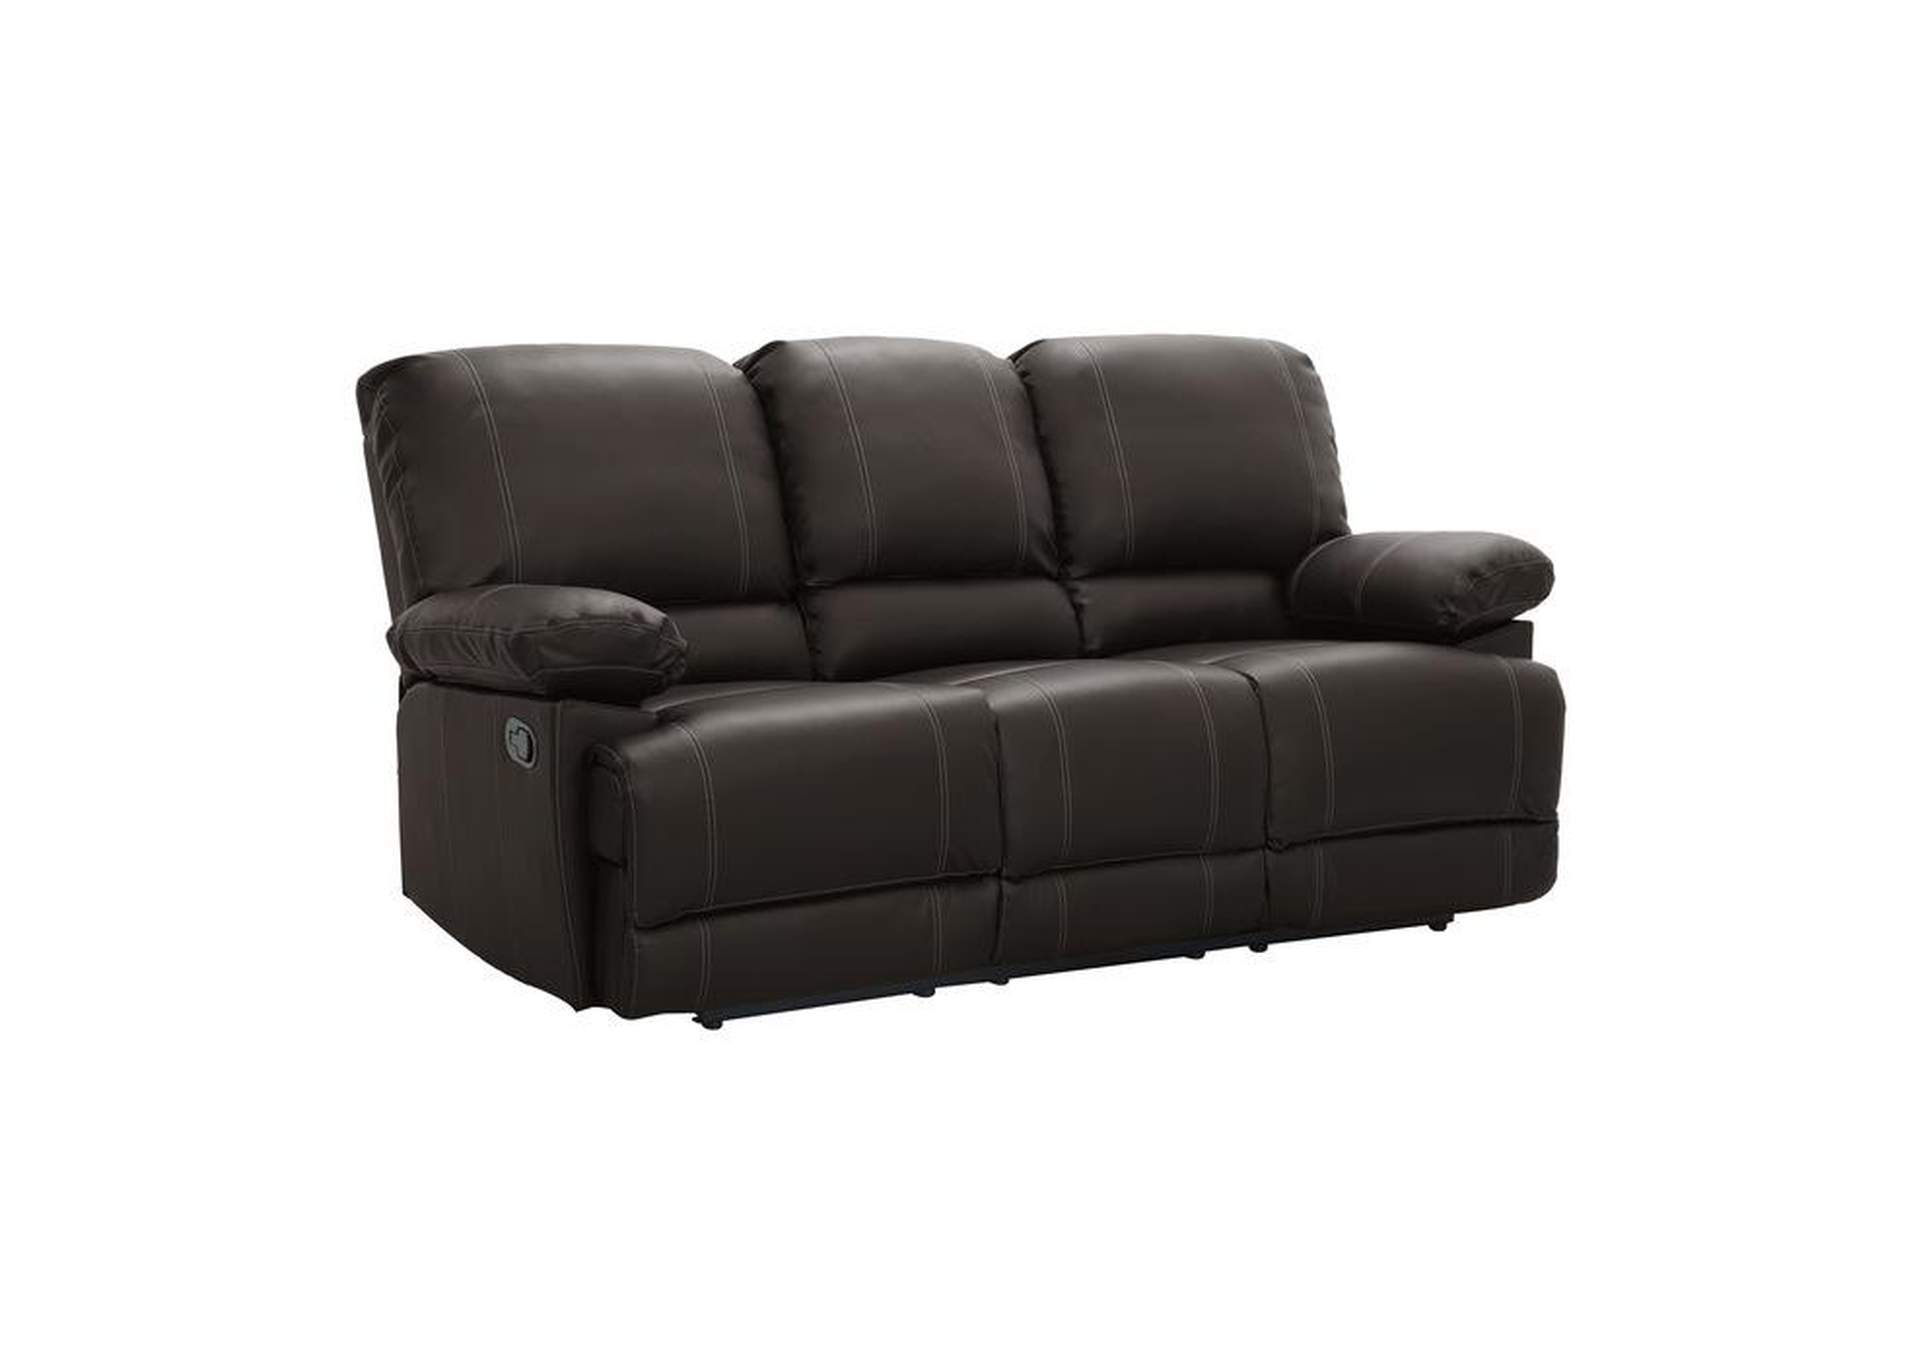 Cassville Double Reclining Sofa With Center Drop-Down Cup Holders,Homelegance